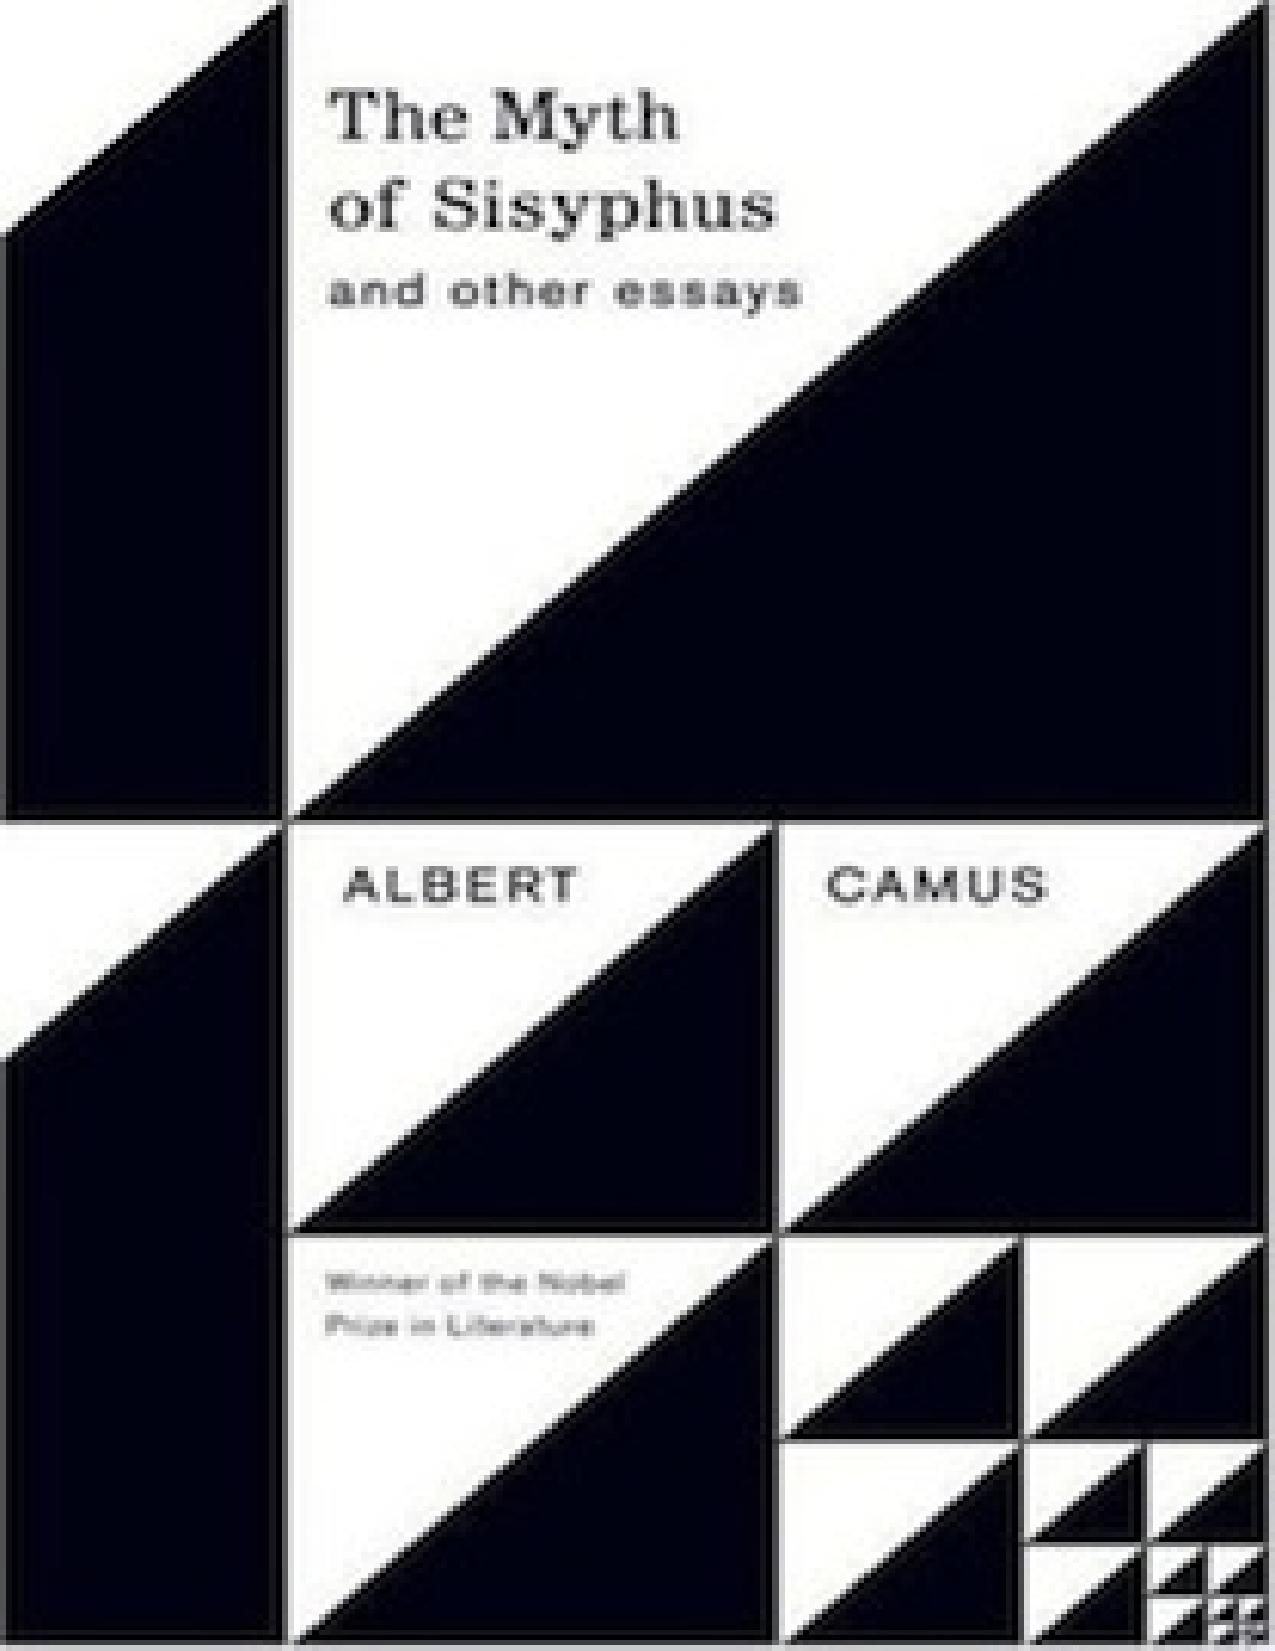 The Myth of Sisyphus and Other Essays